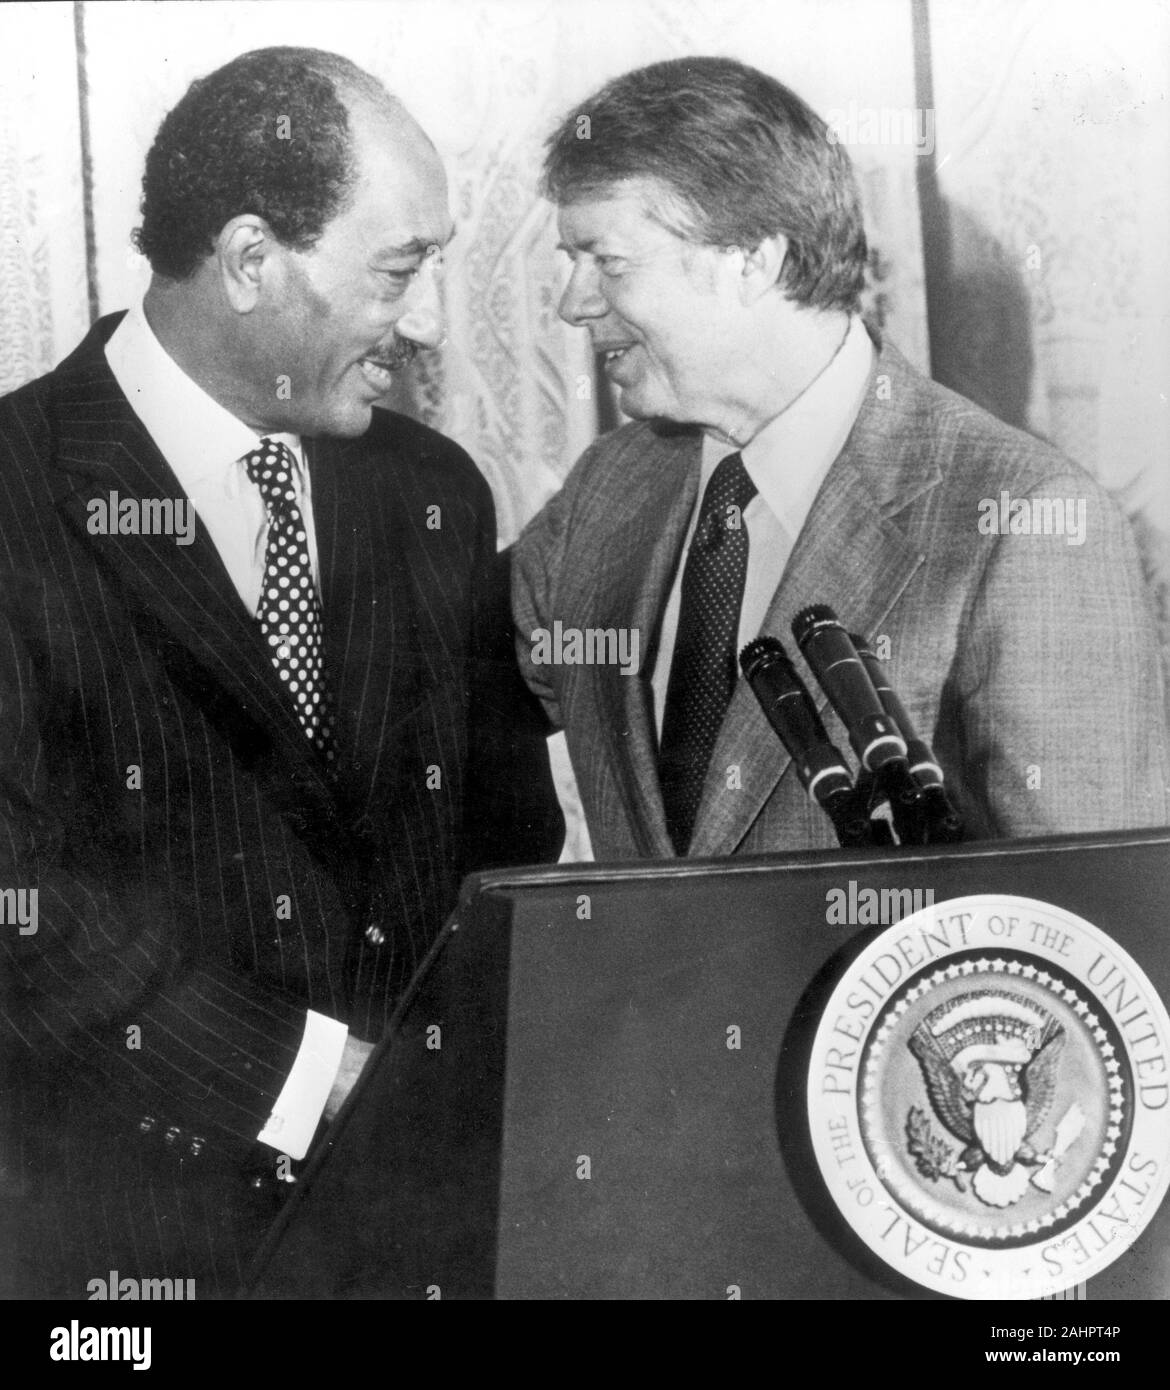 Apr 4, 1977 - Washington, District of Columbia, USA - JIMMY CARTER stands with Egyptian President ANWAR SADAT at a podium with the presidential seal. President Sadat is in town to continue peace terms conversation with President Carter.(Credit Image: © Keystone Press Agency/Keystone USA via ZUMAPRESS.com) Stock Photo